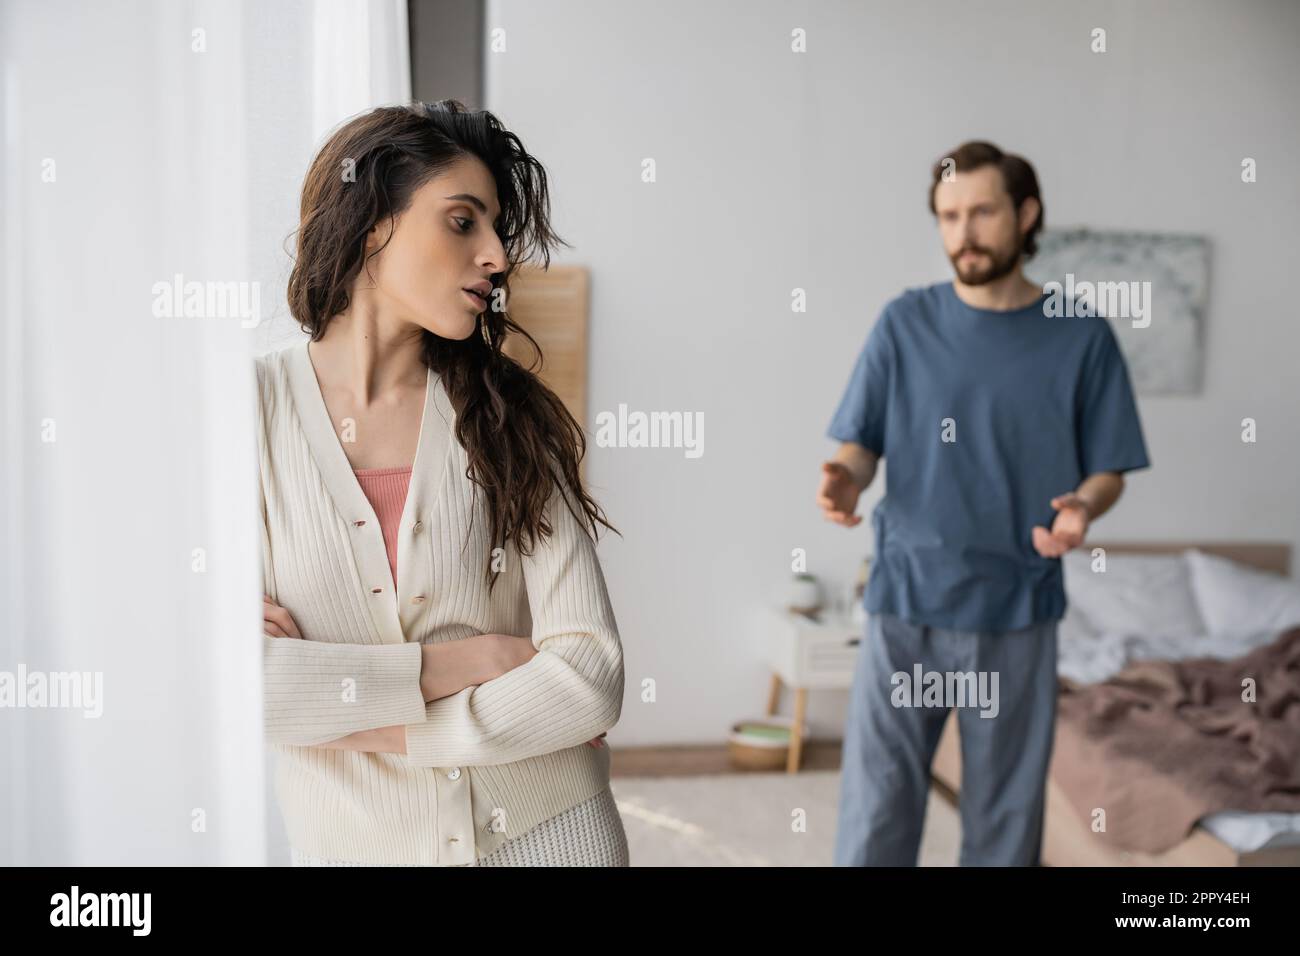 Displeased woman crossing arms near blurred boyfriend quarrelling at home,stock image Stock Photo